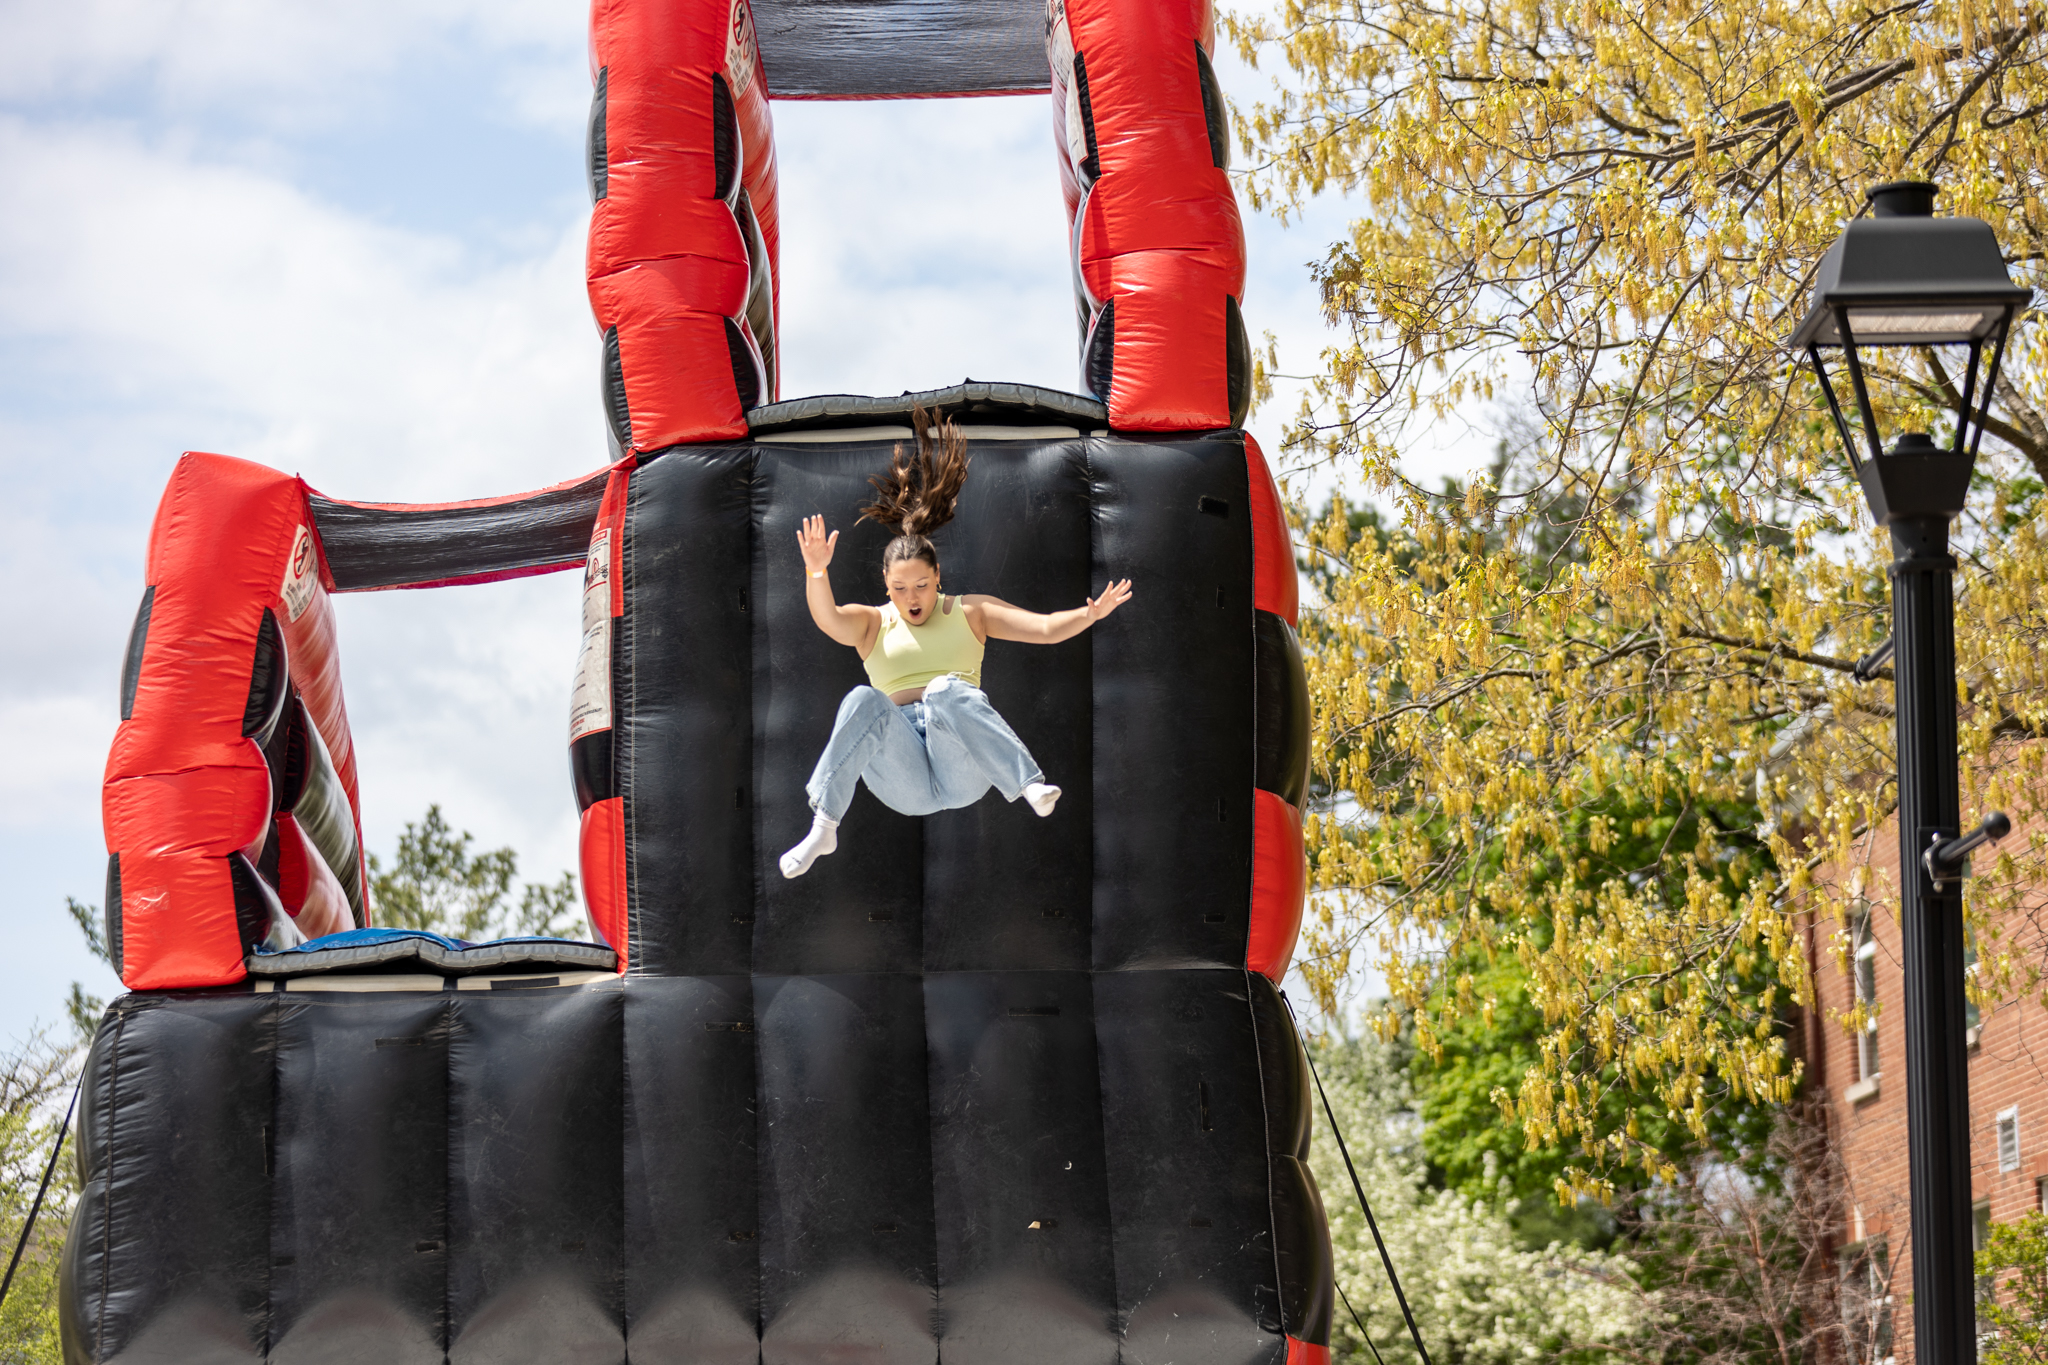 For a thrill, students could free fall on an inflatable double jump, provided by SuperGames.